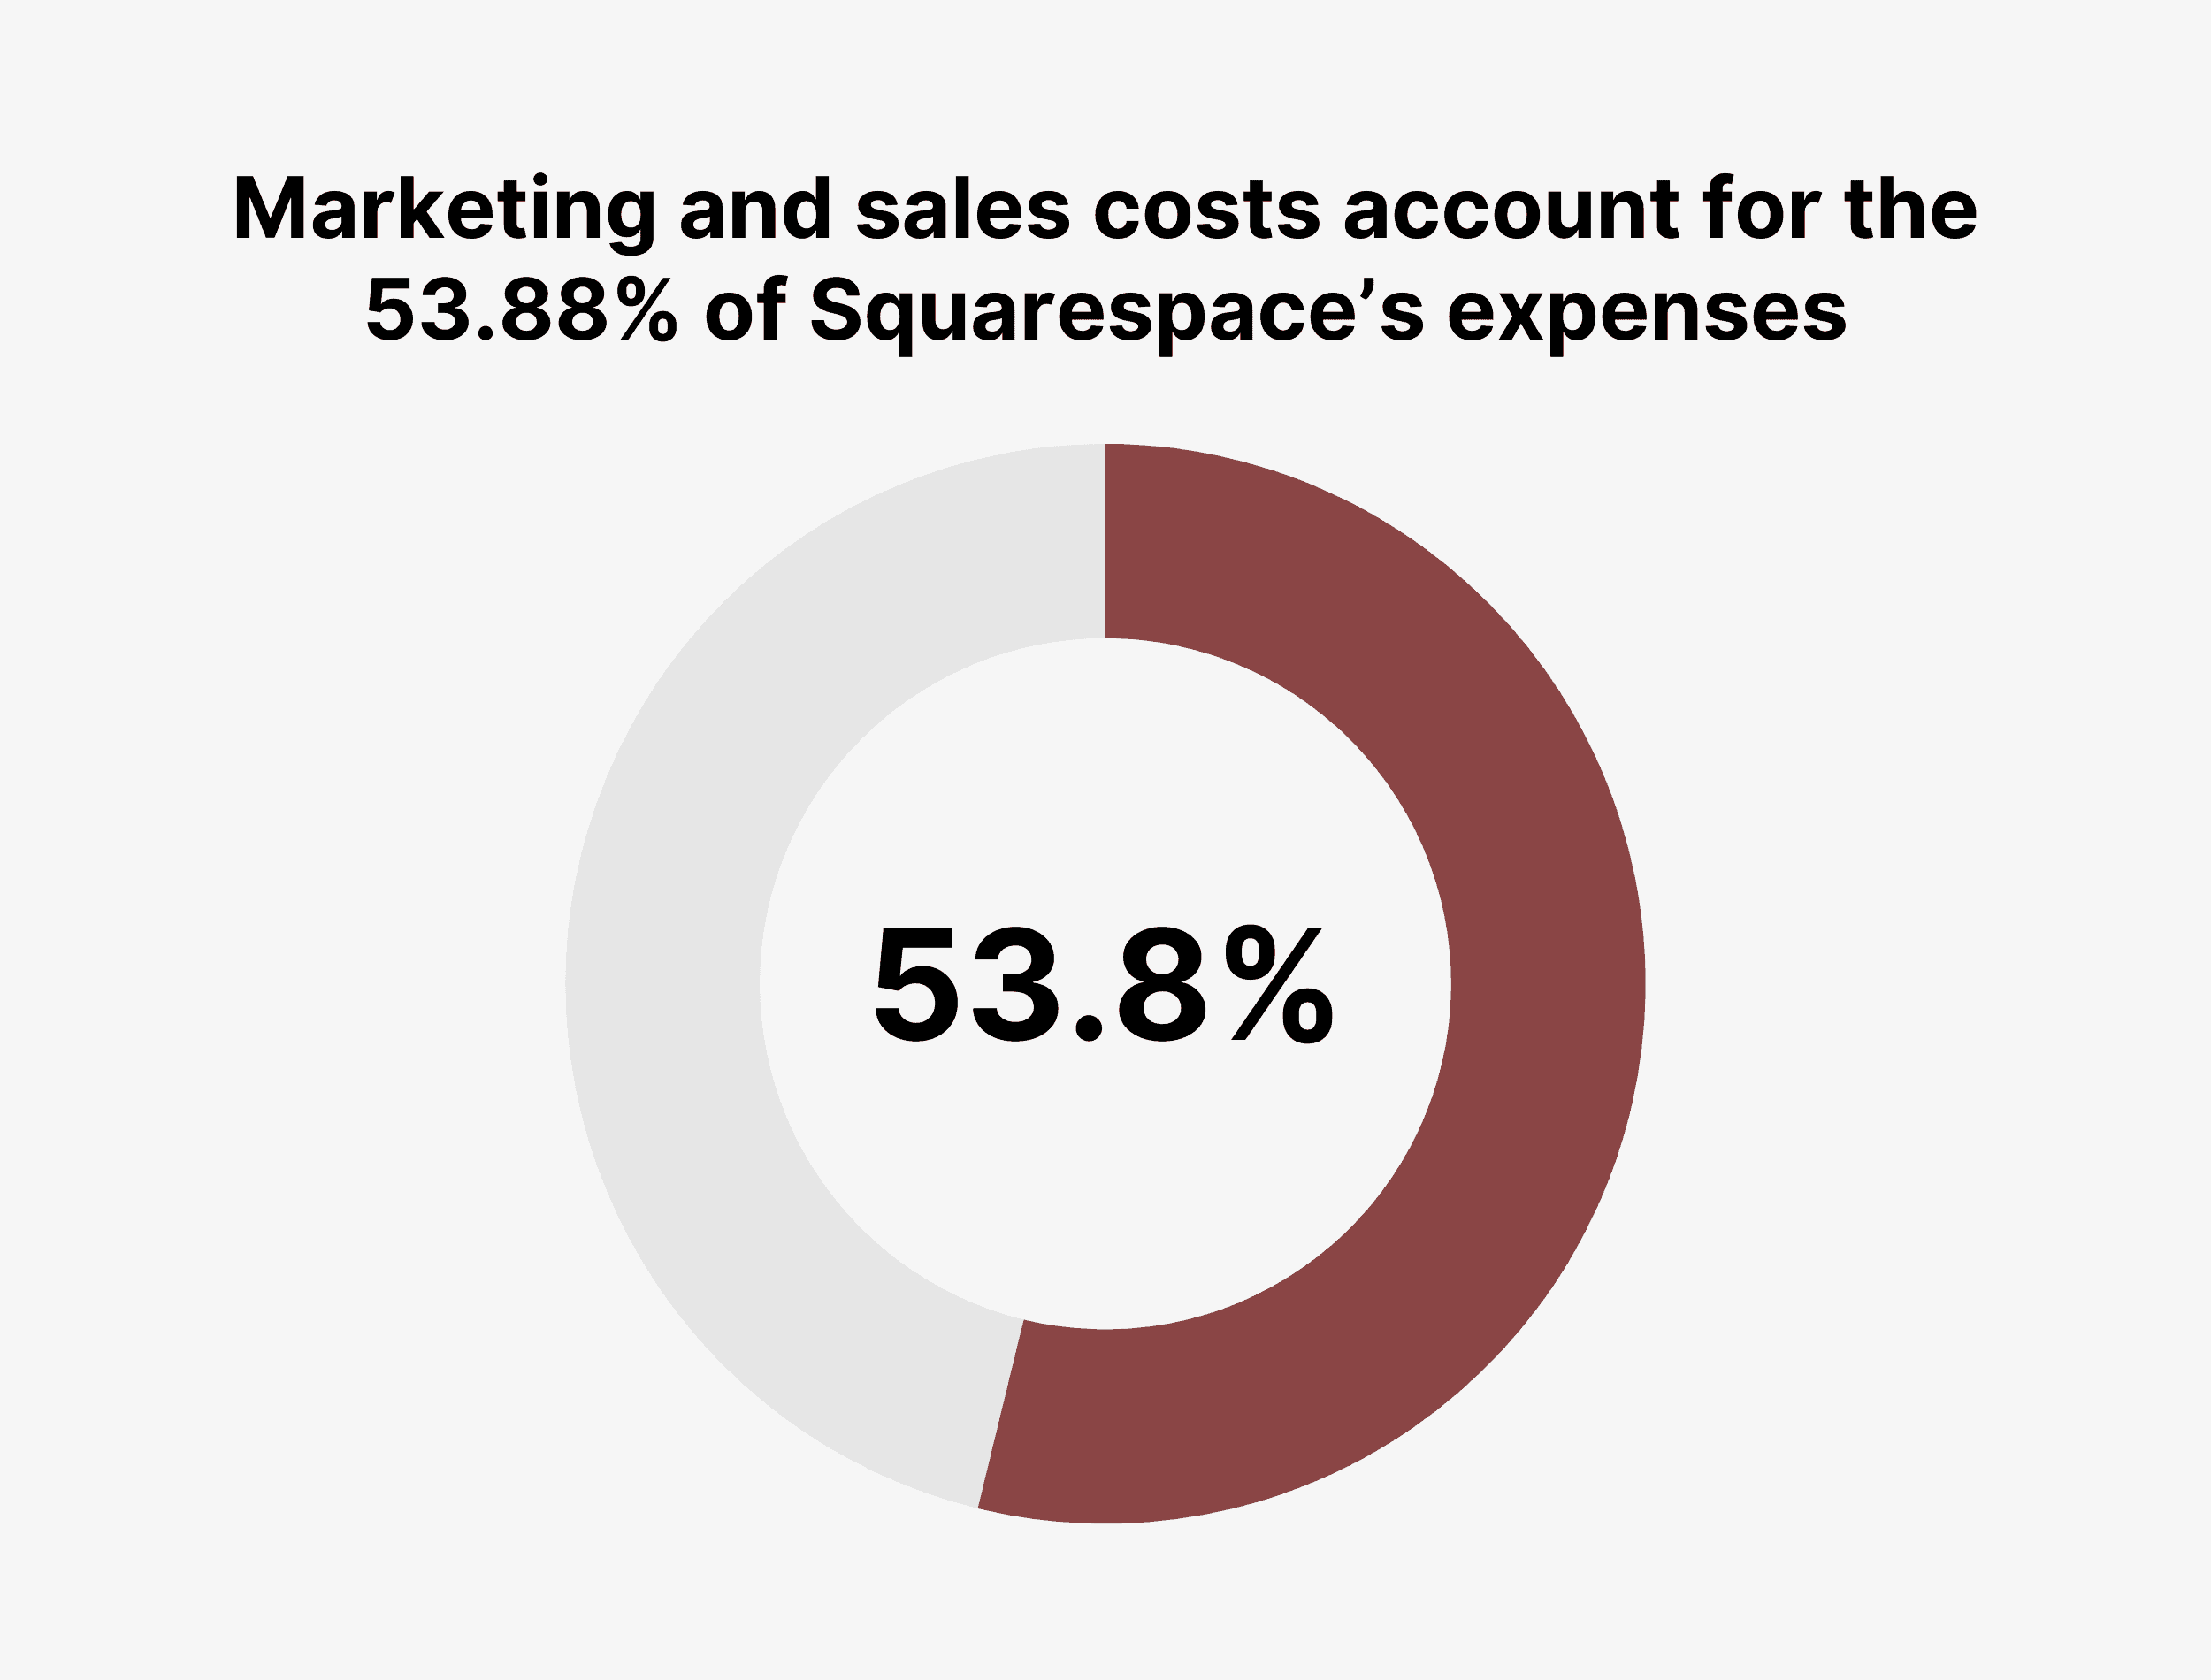 Marketing and sales costs account for the 53.88% of Squarespace’s expenses